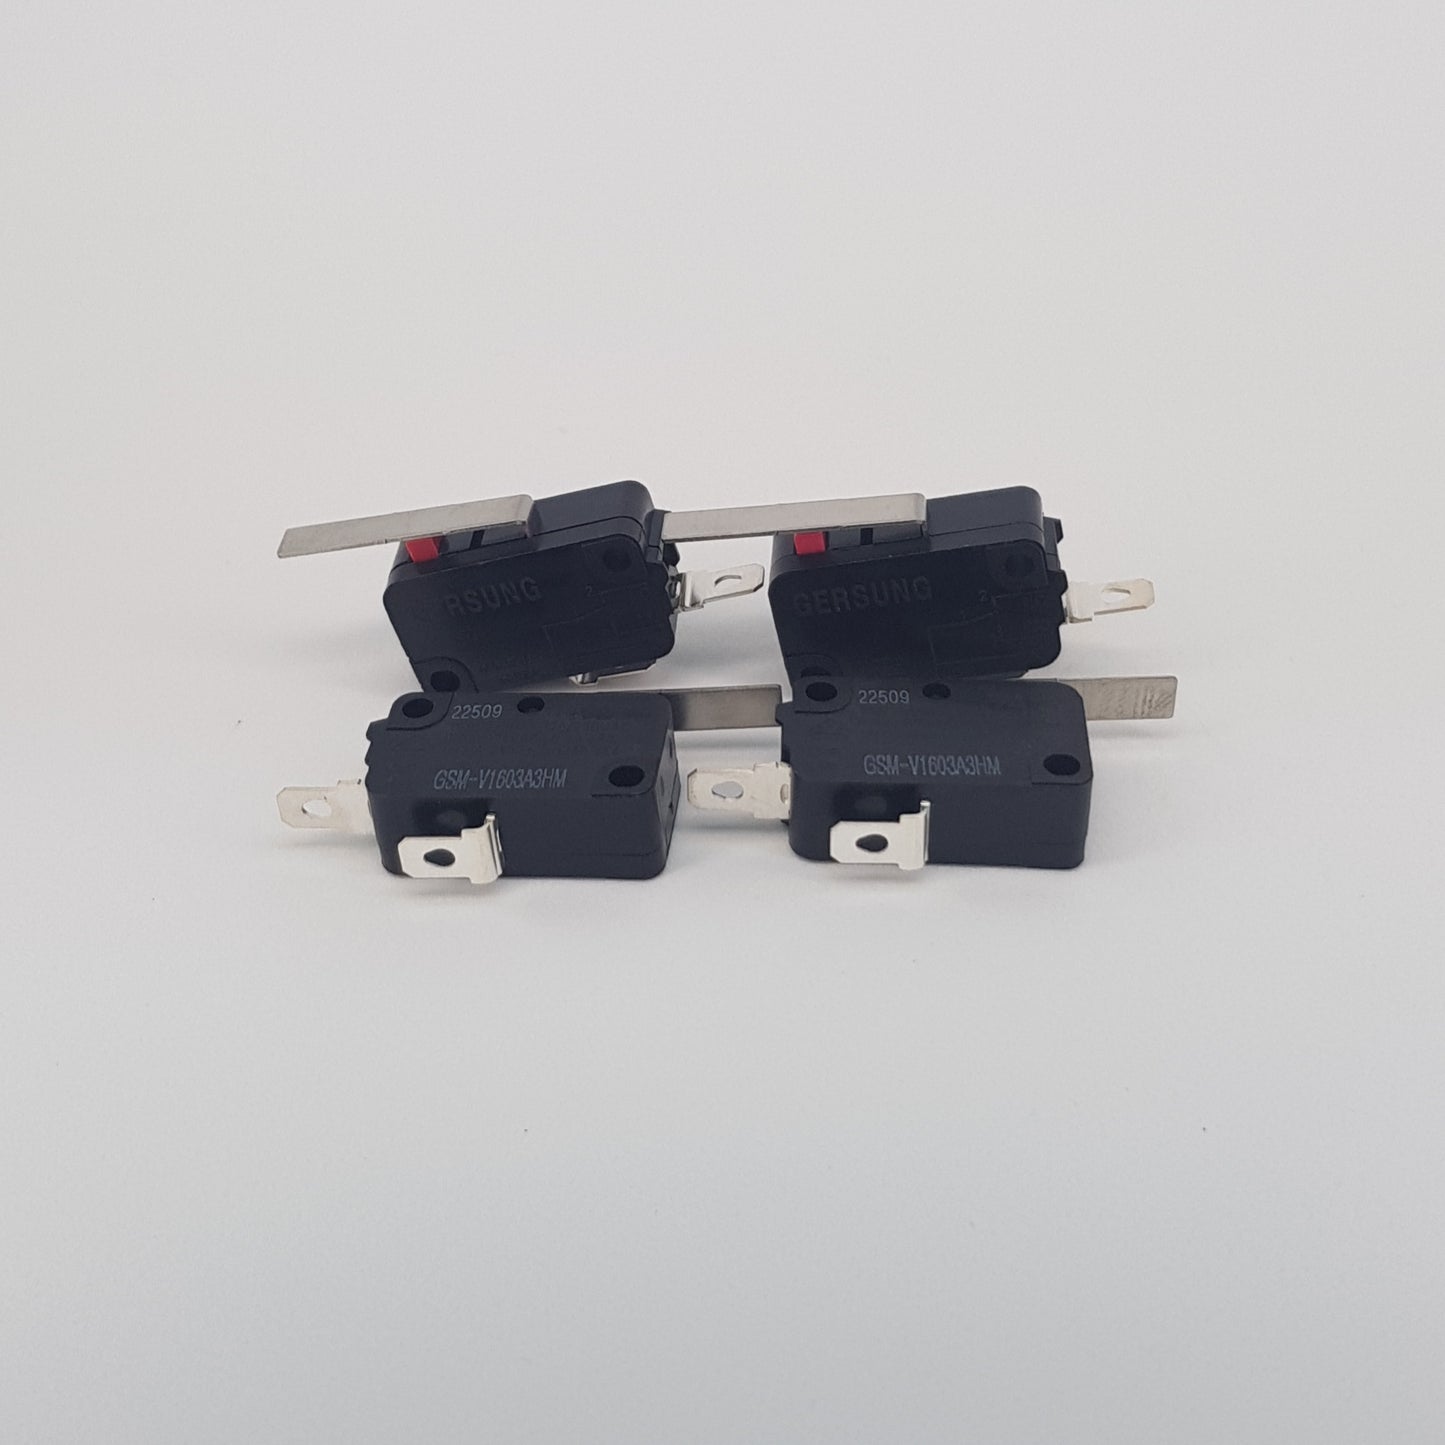 Gersung GSM-V1603A3HM microswitch pack (levered microswitch)